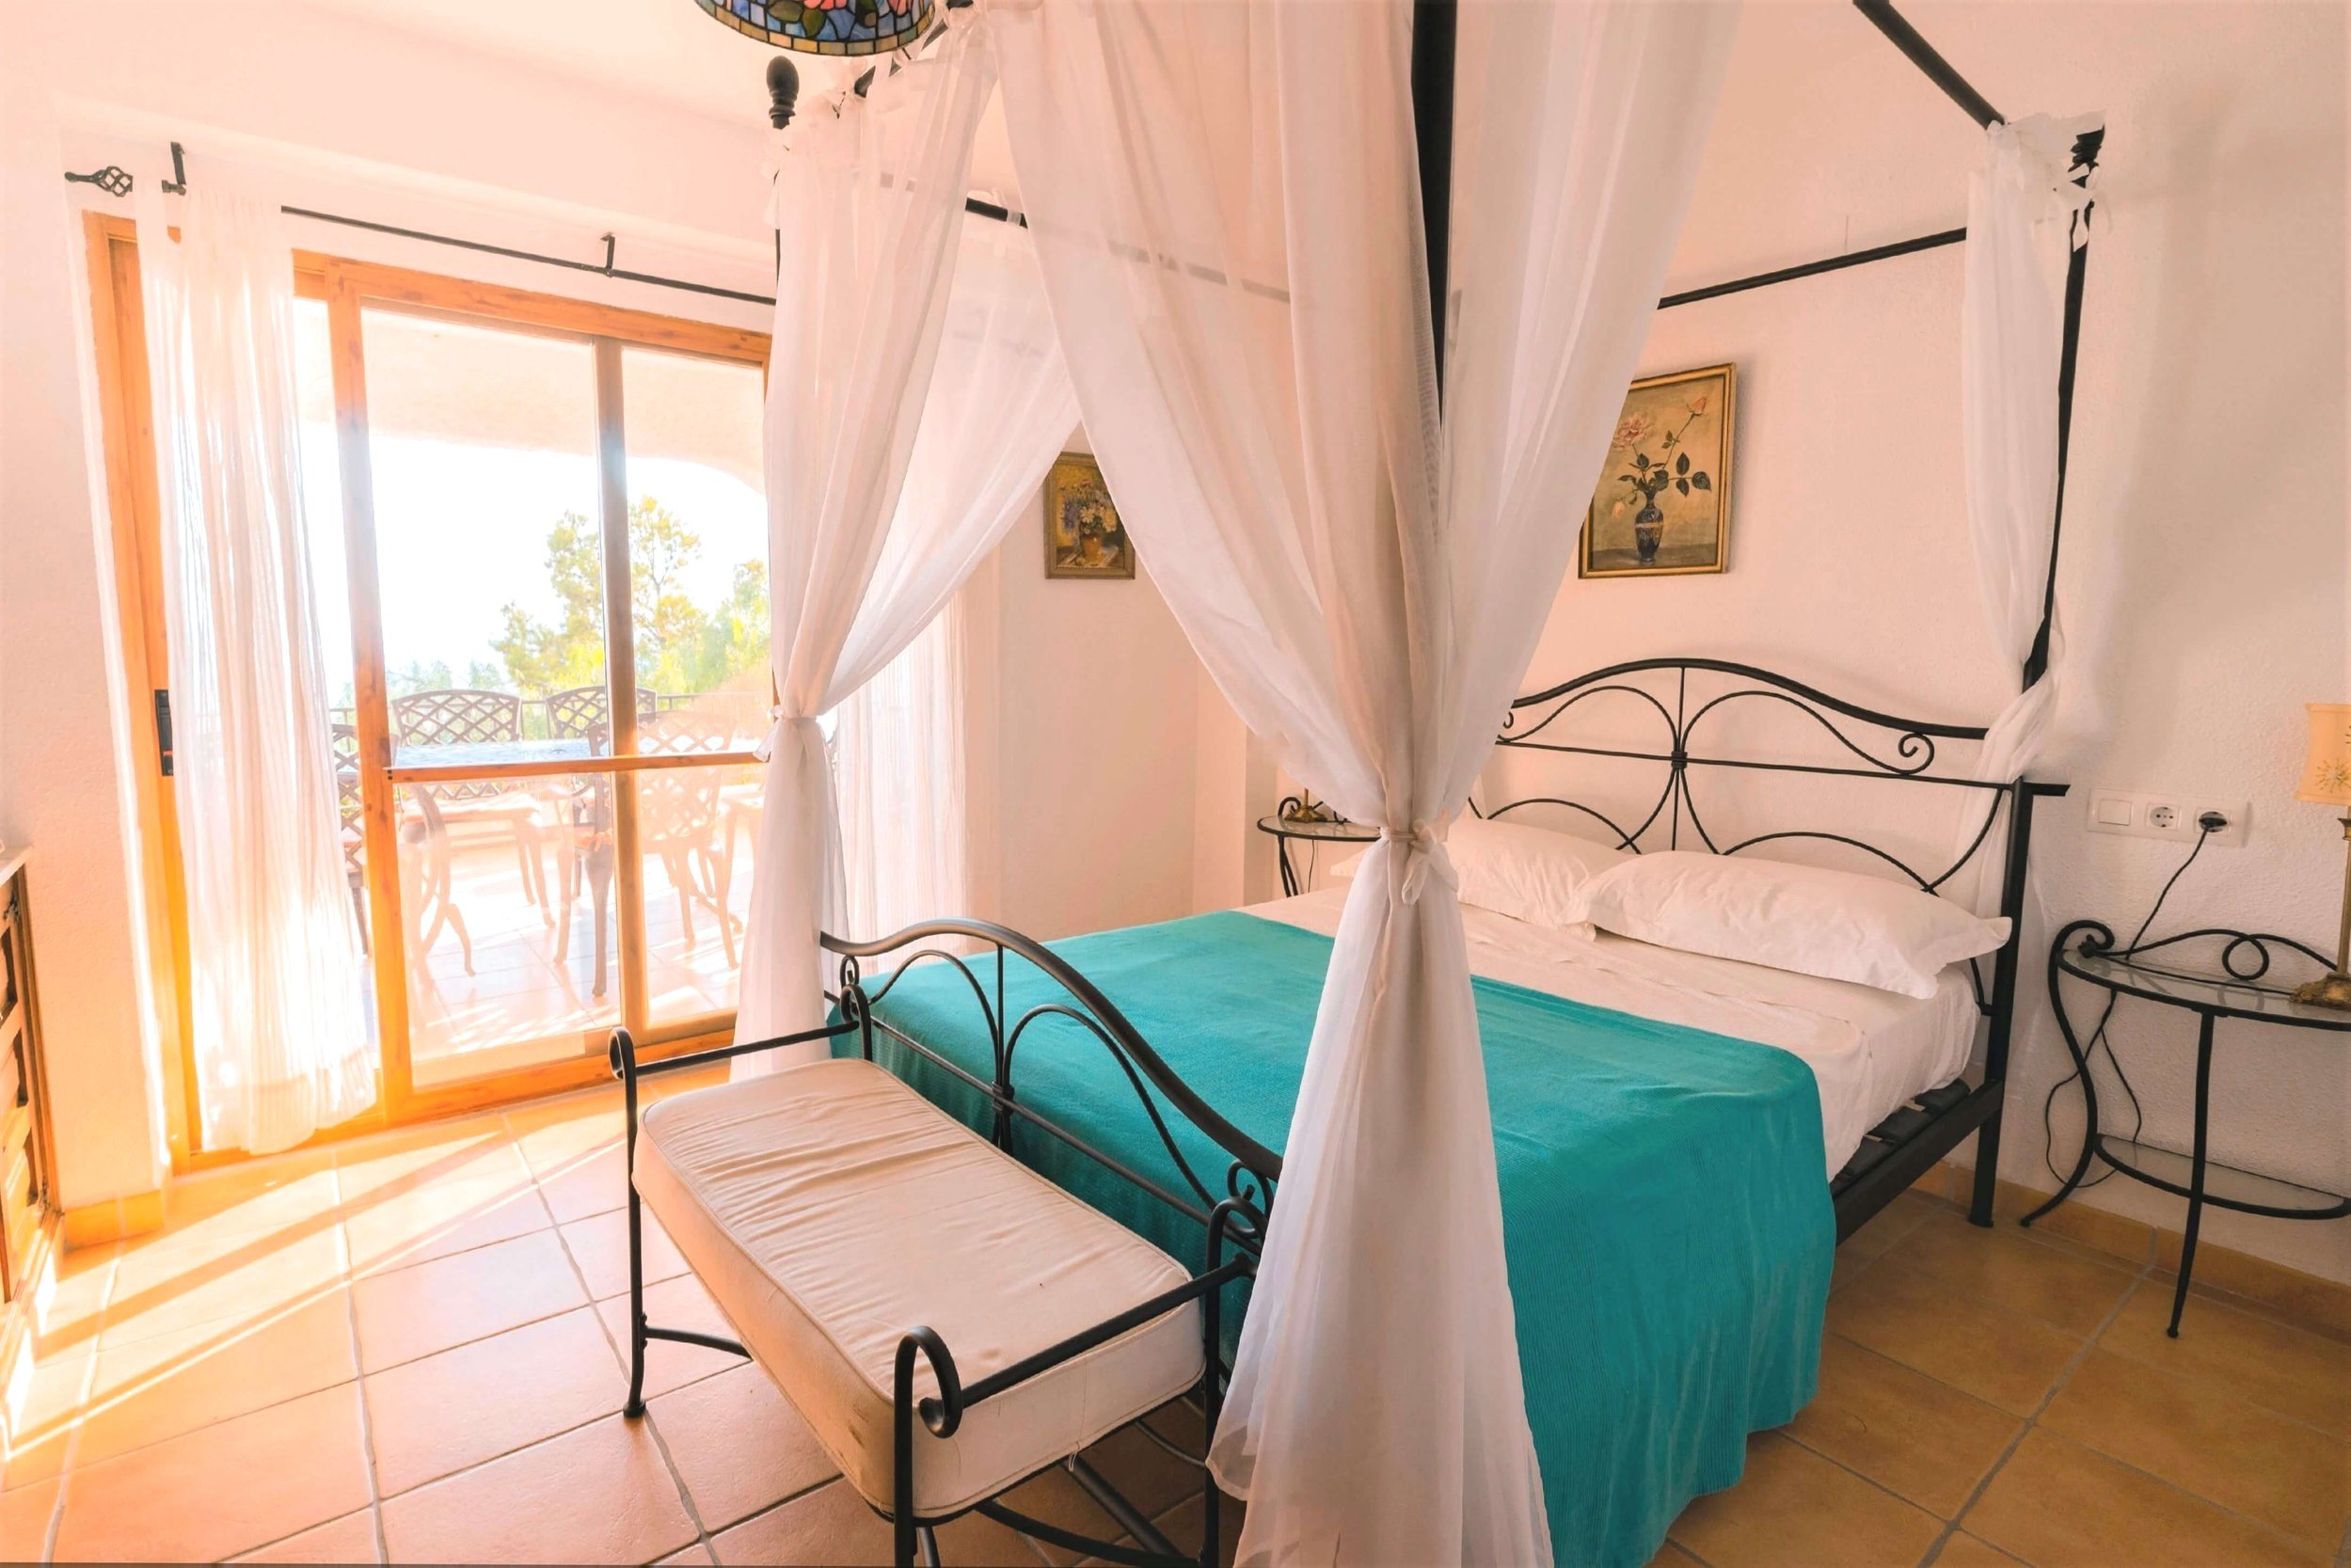 Master Bedroom with four poster bed and private balcony offering a relaxing retreat